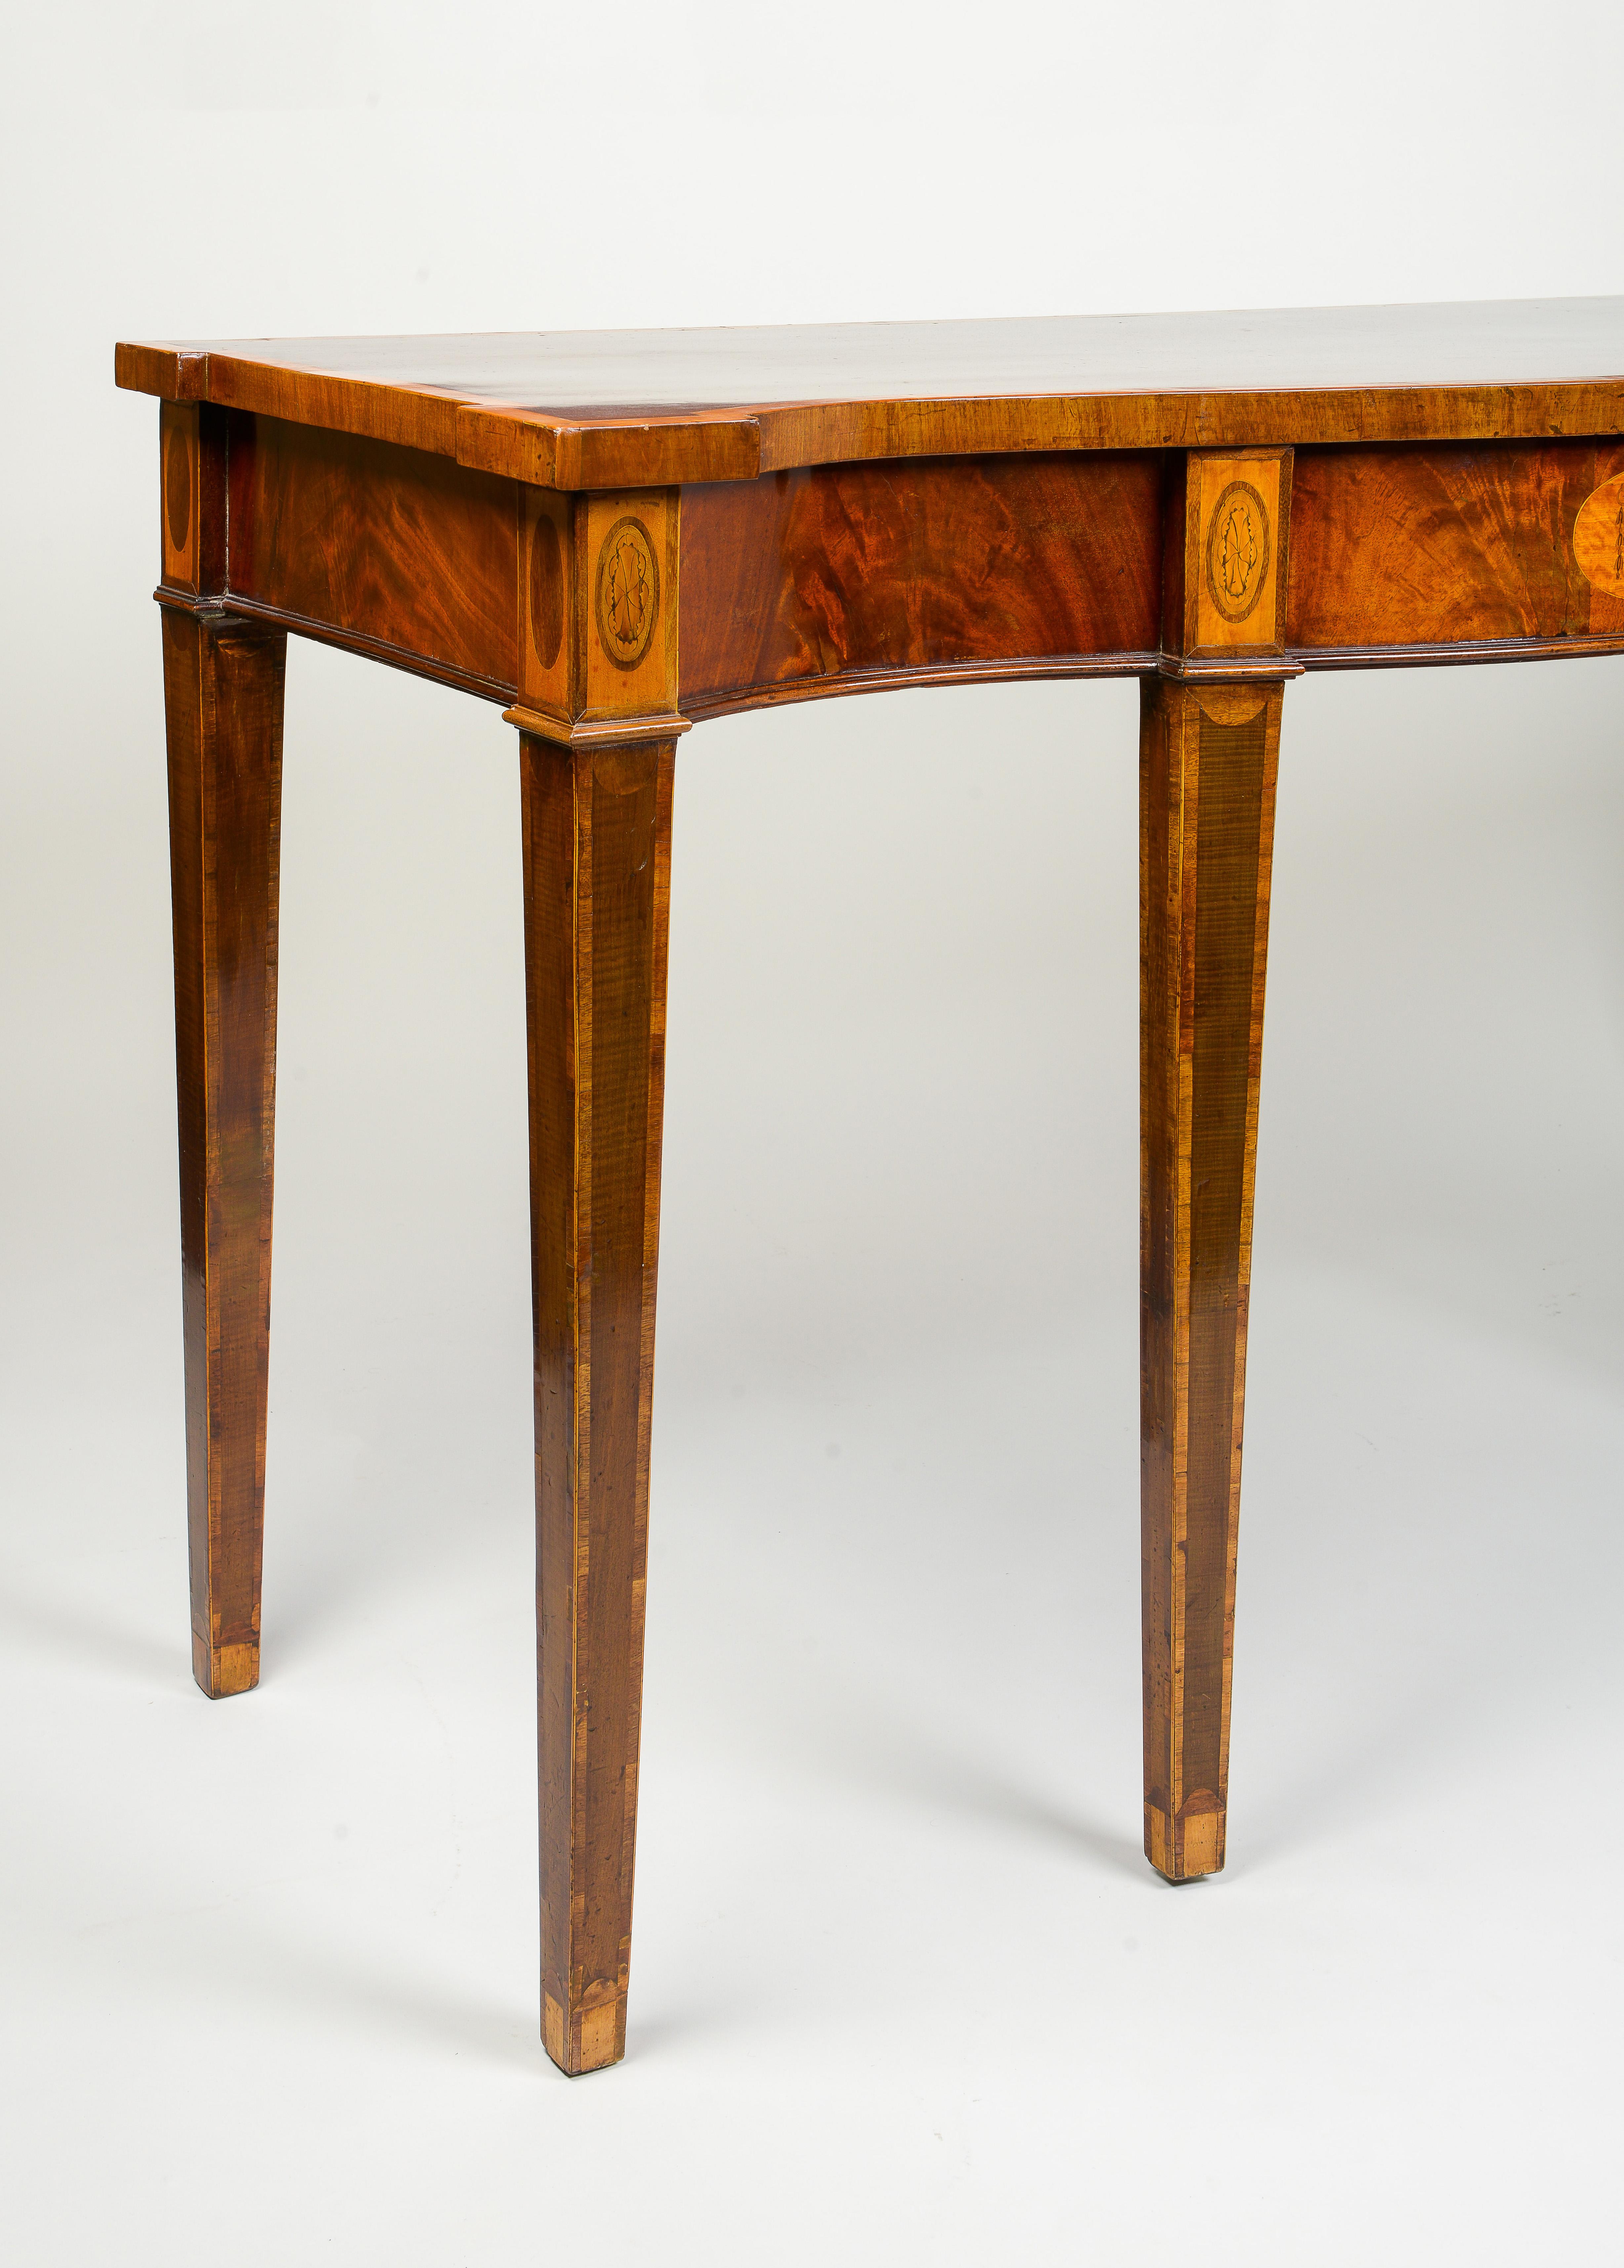 Late 18th Century Fine George III Mahogany and Satinwood-Inlaid Serpentine Serving Table For Sale